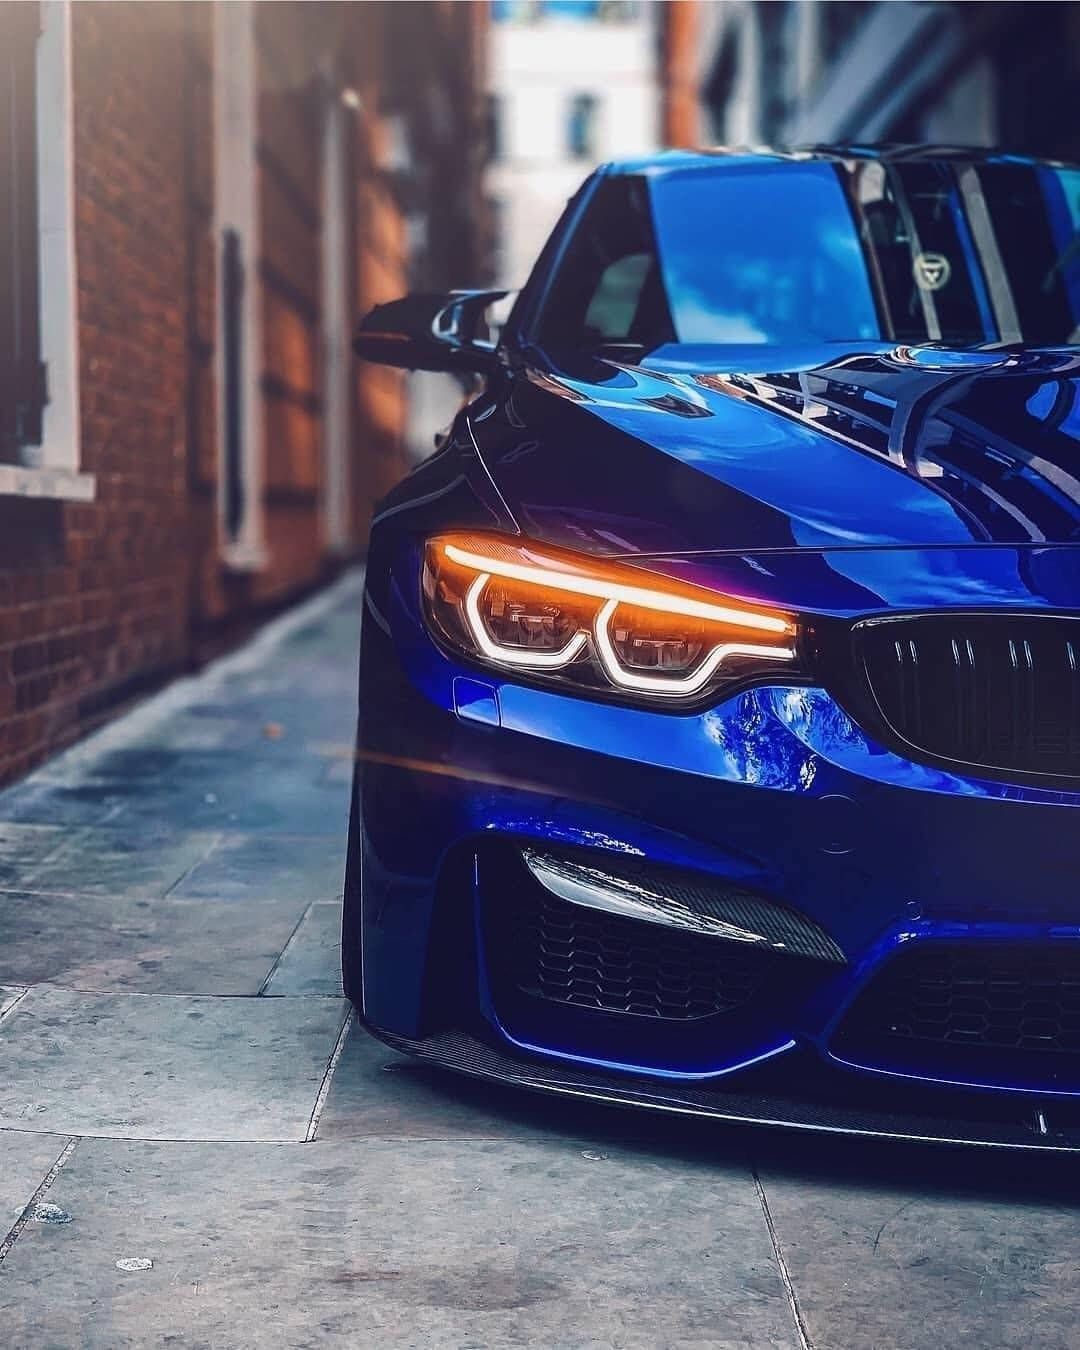 The bmw m4 gts is a high performance car - BMW